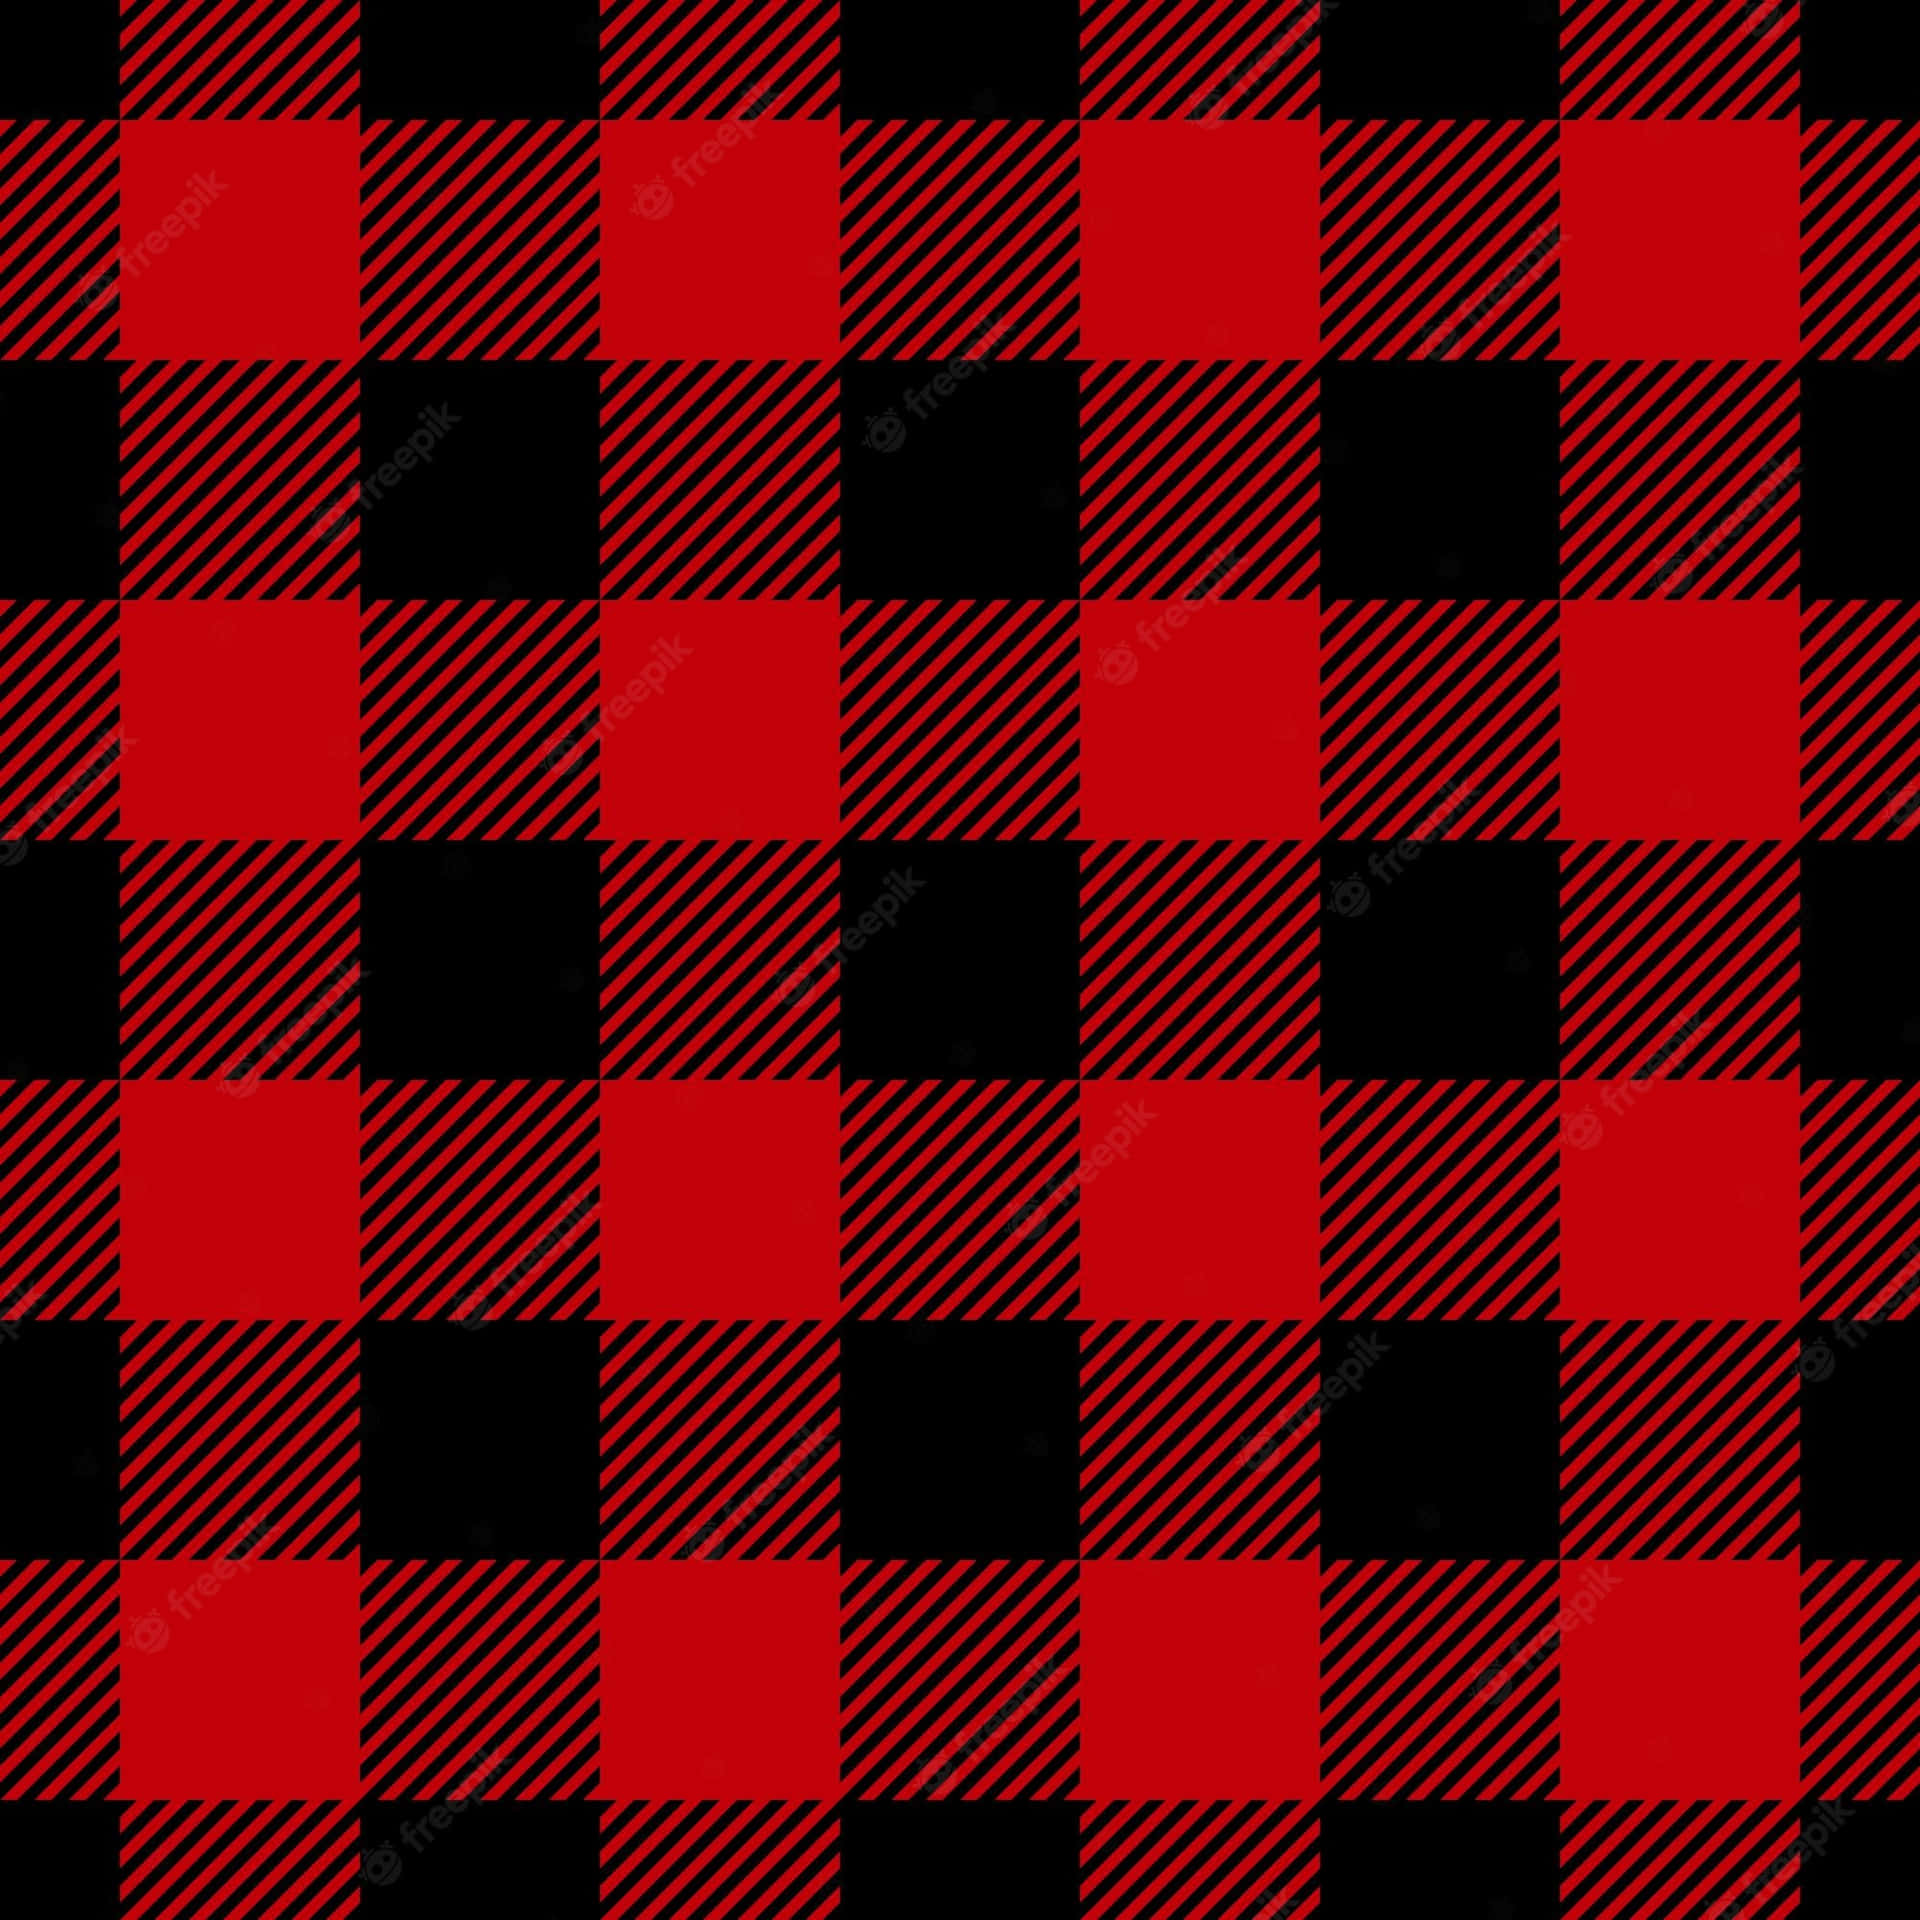 Compliment your style with this bold black and red plaid Wallpaper